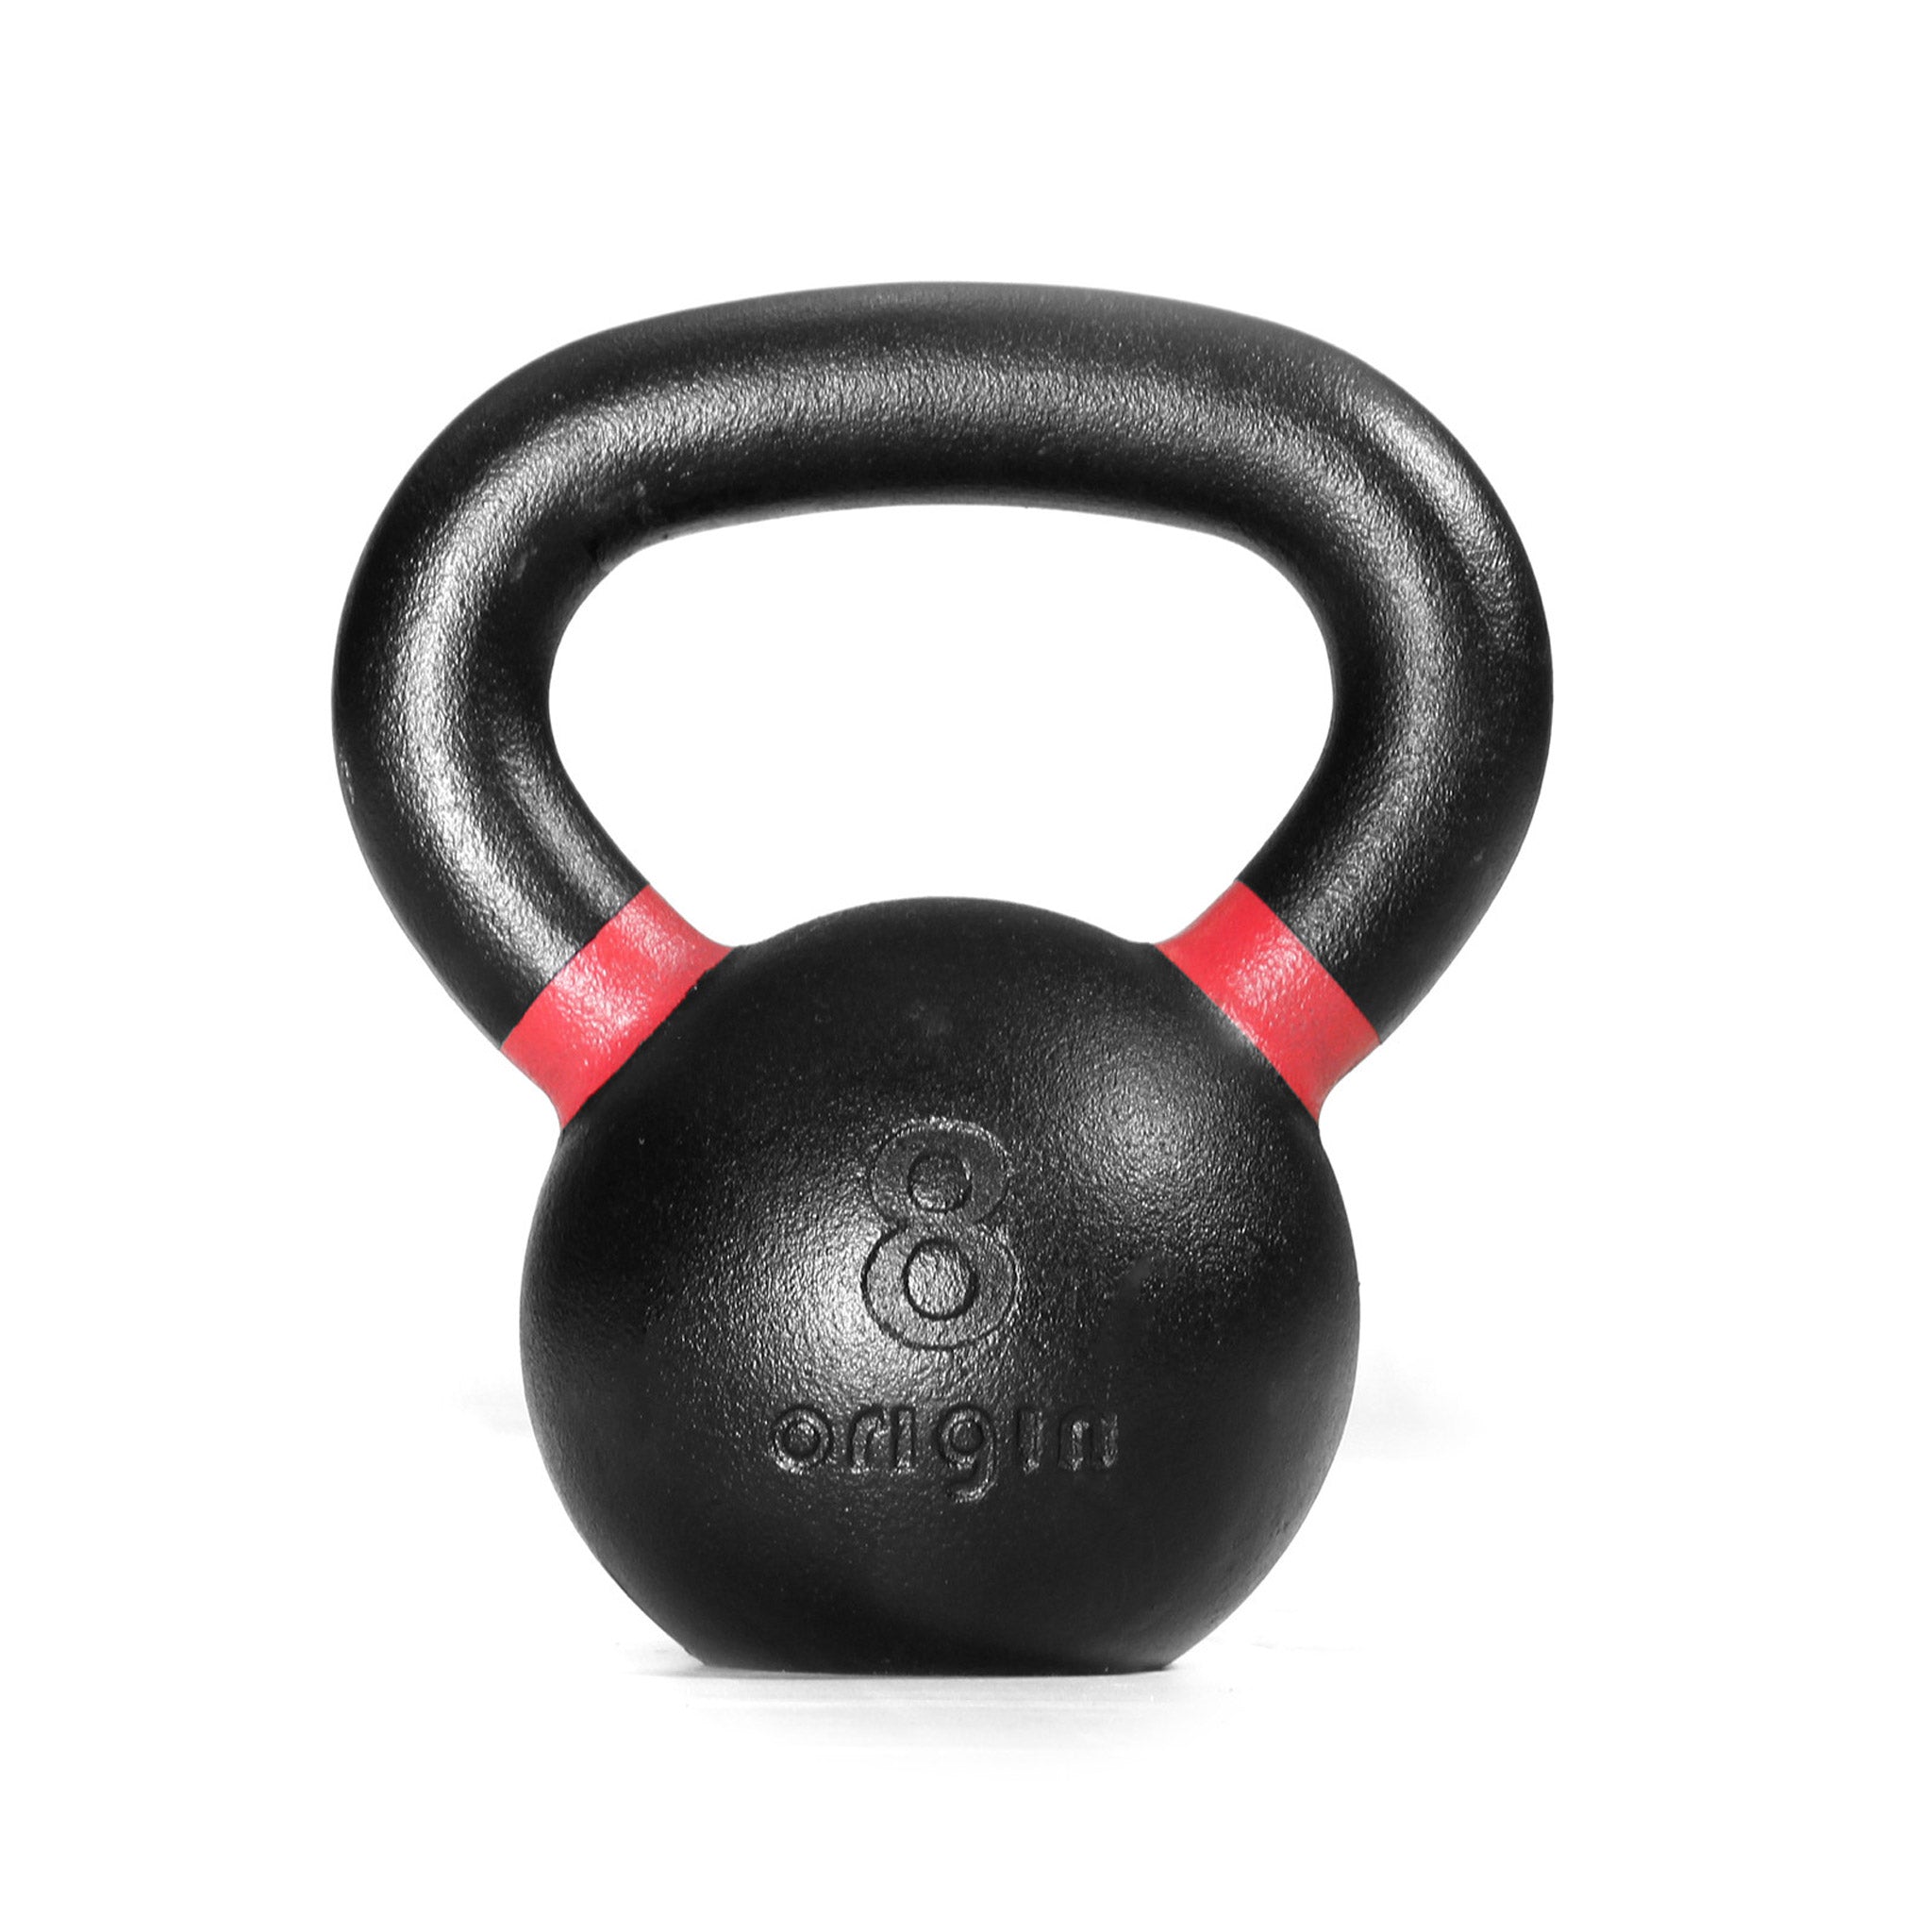 8kg cast iron kettlebell with red markings on handle